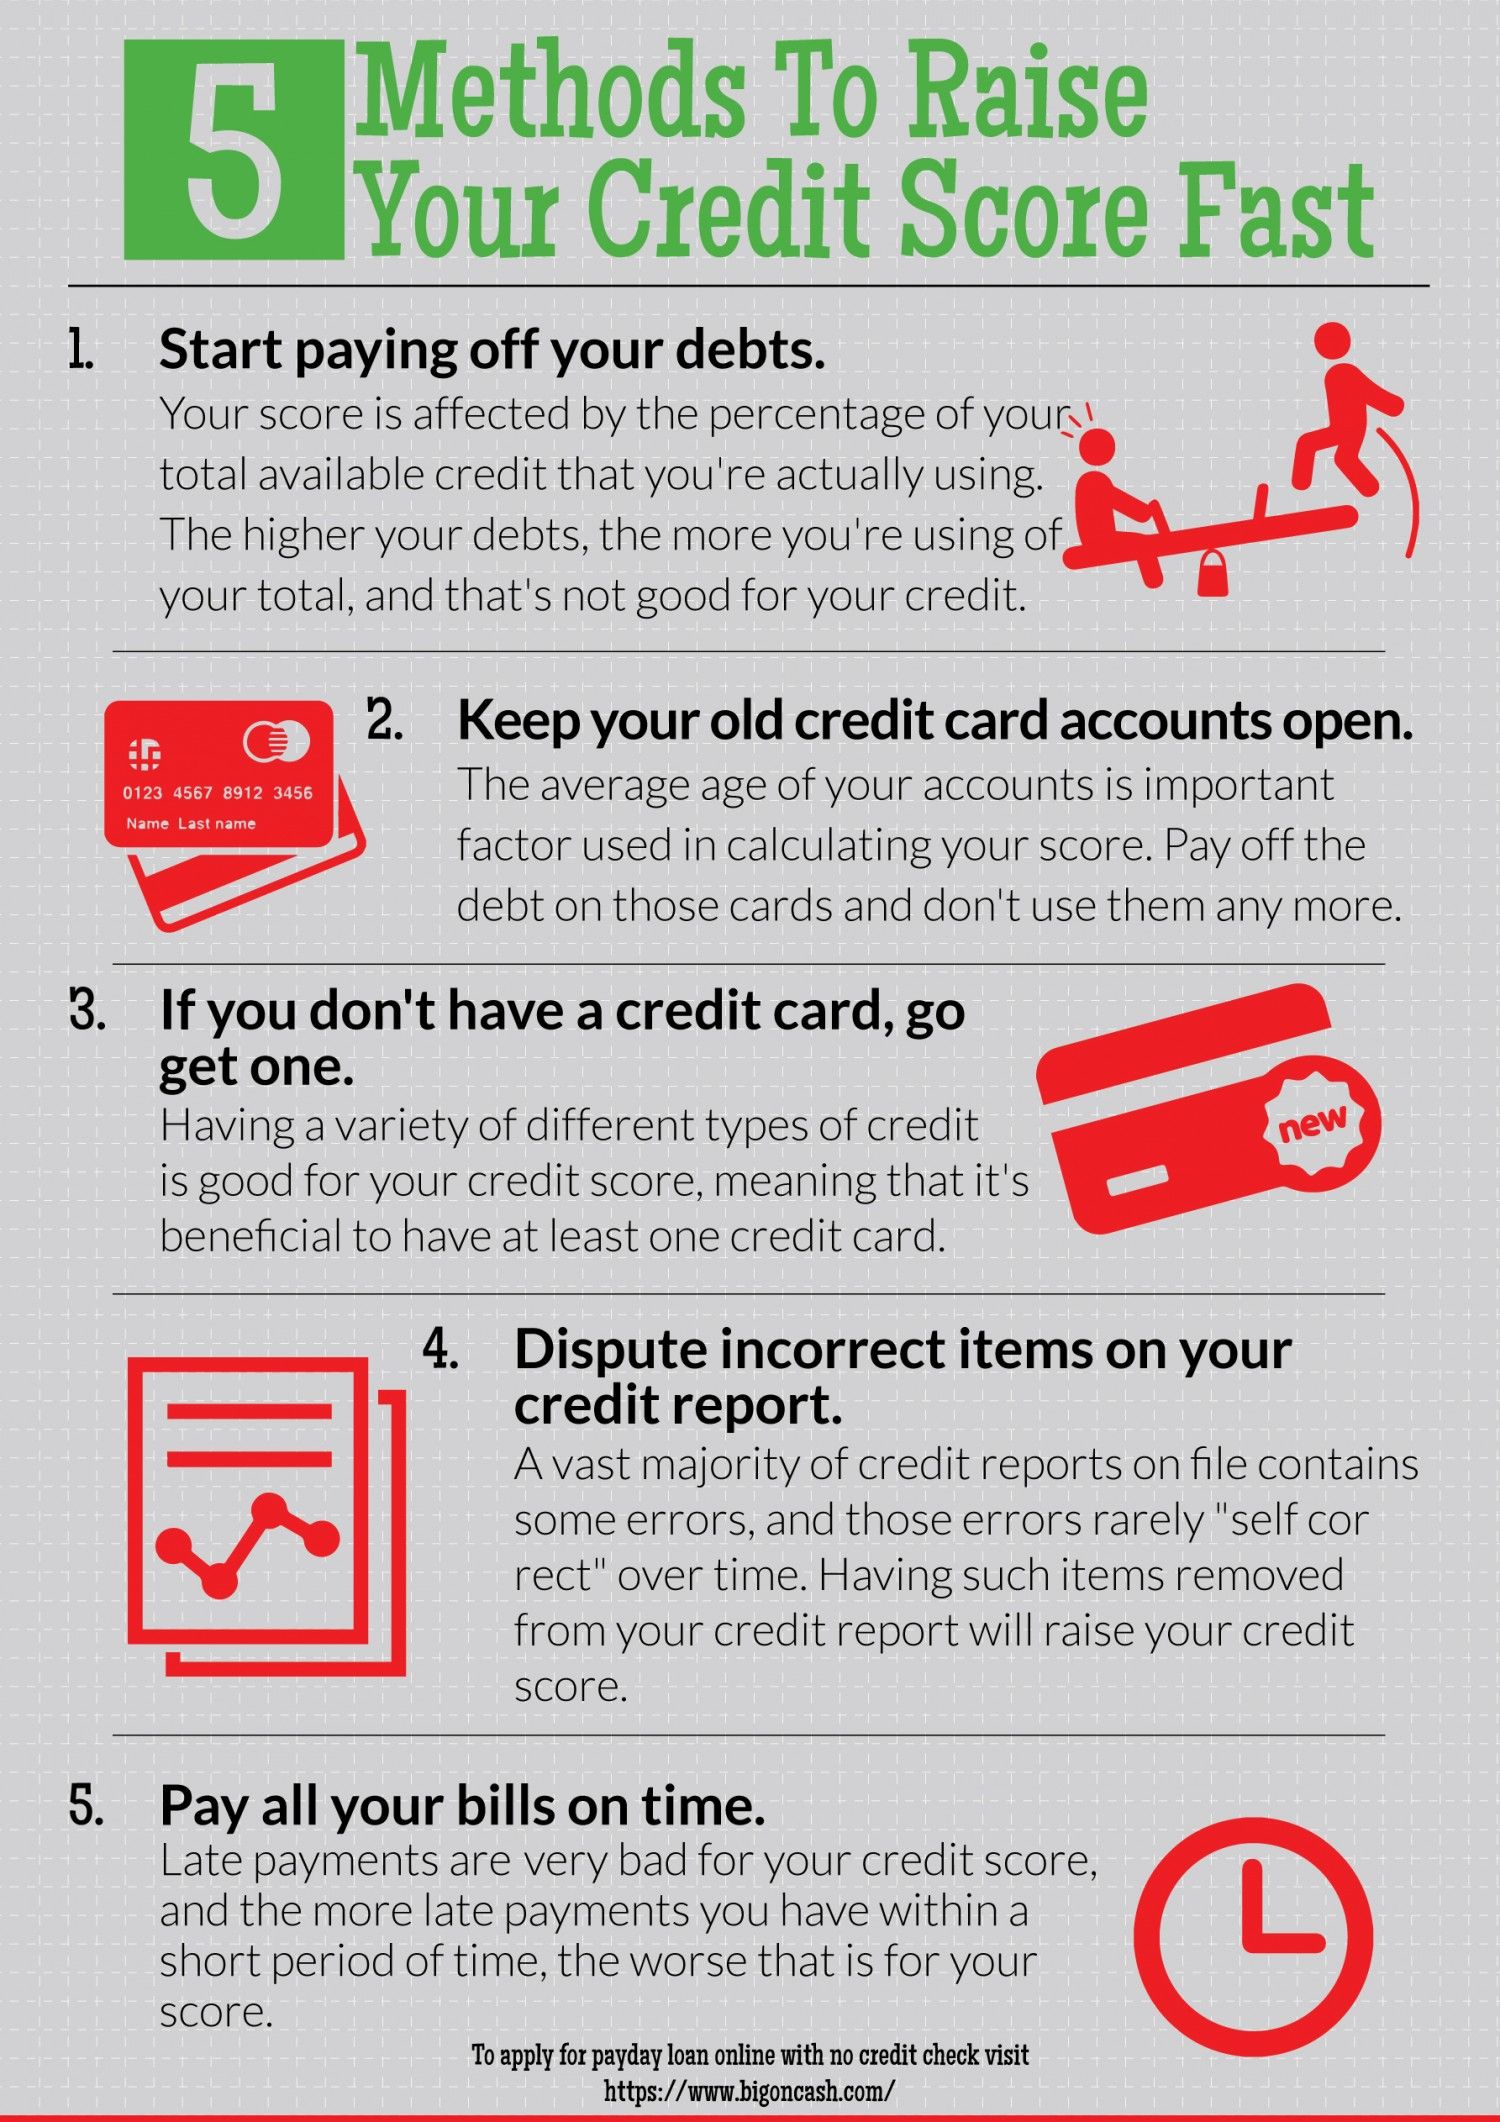 How To Increase Your Credit Score Quickly Uk